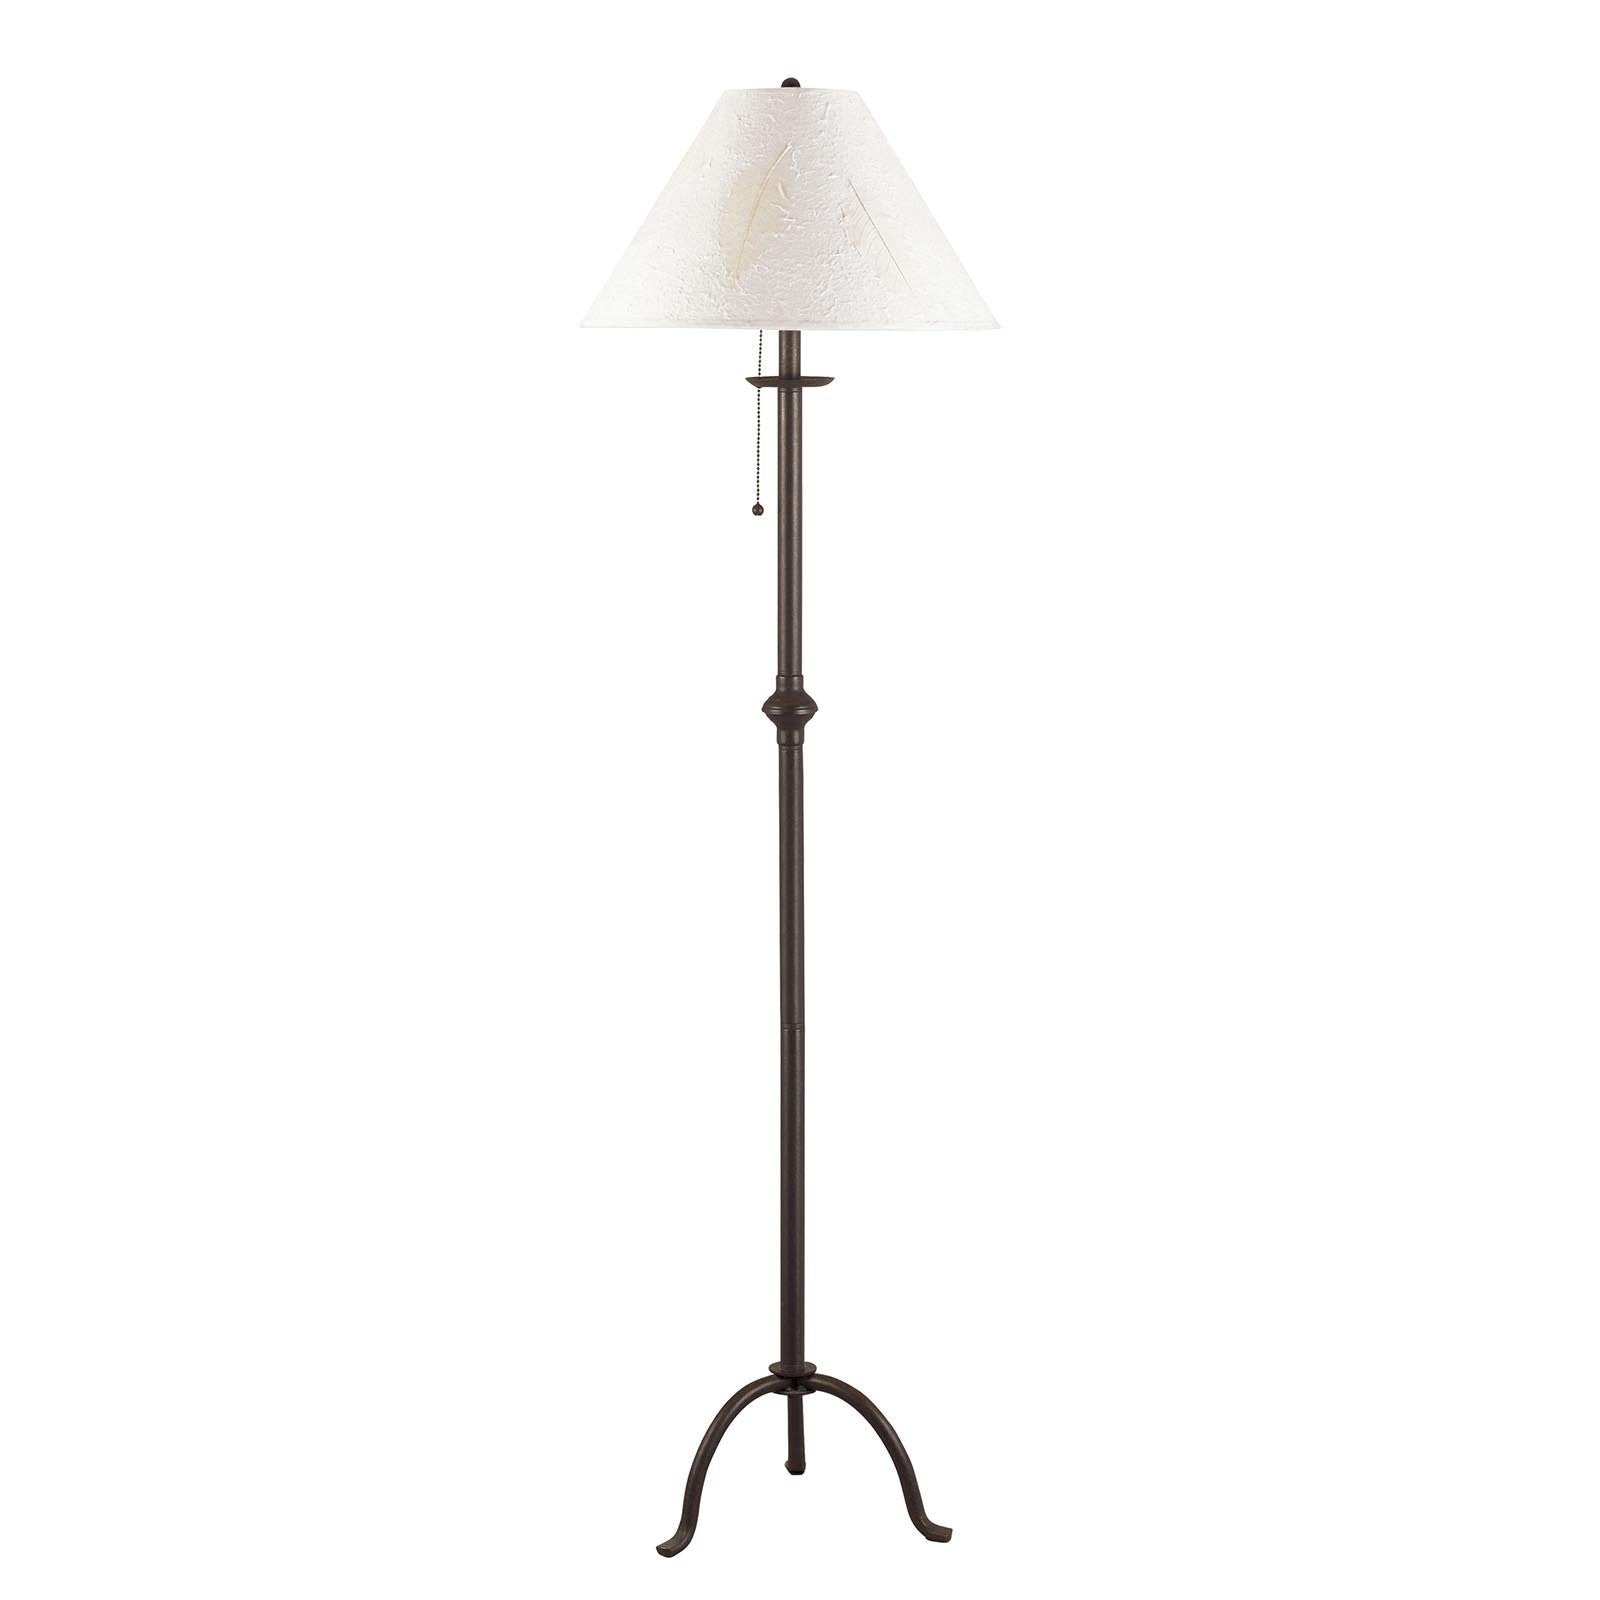 57" Black Traditional Shaped Floor Lamp With White Empire Shade